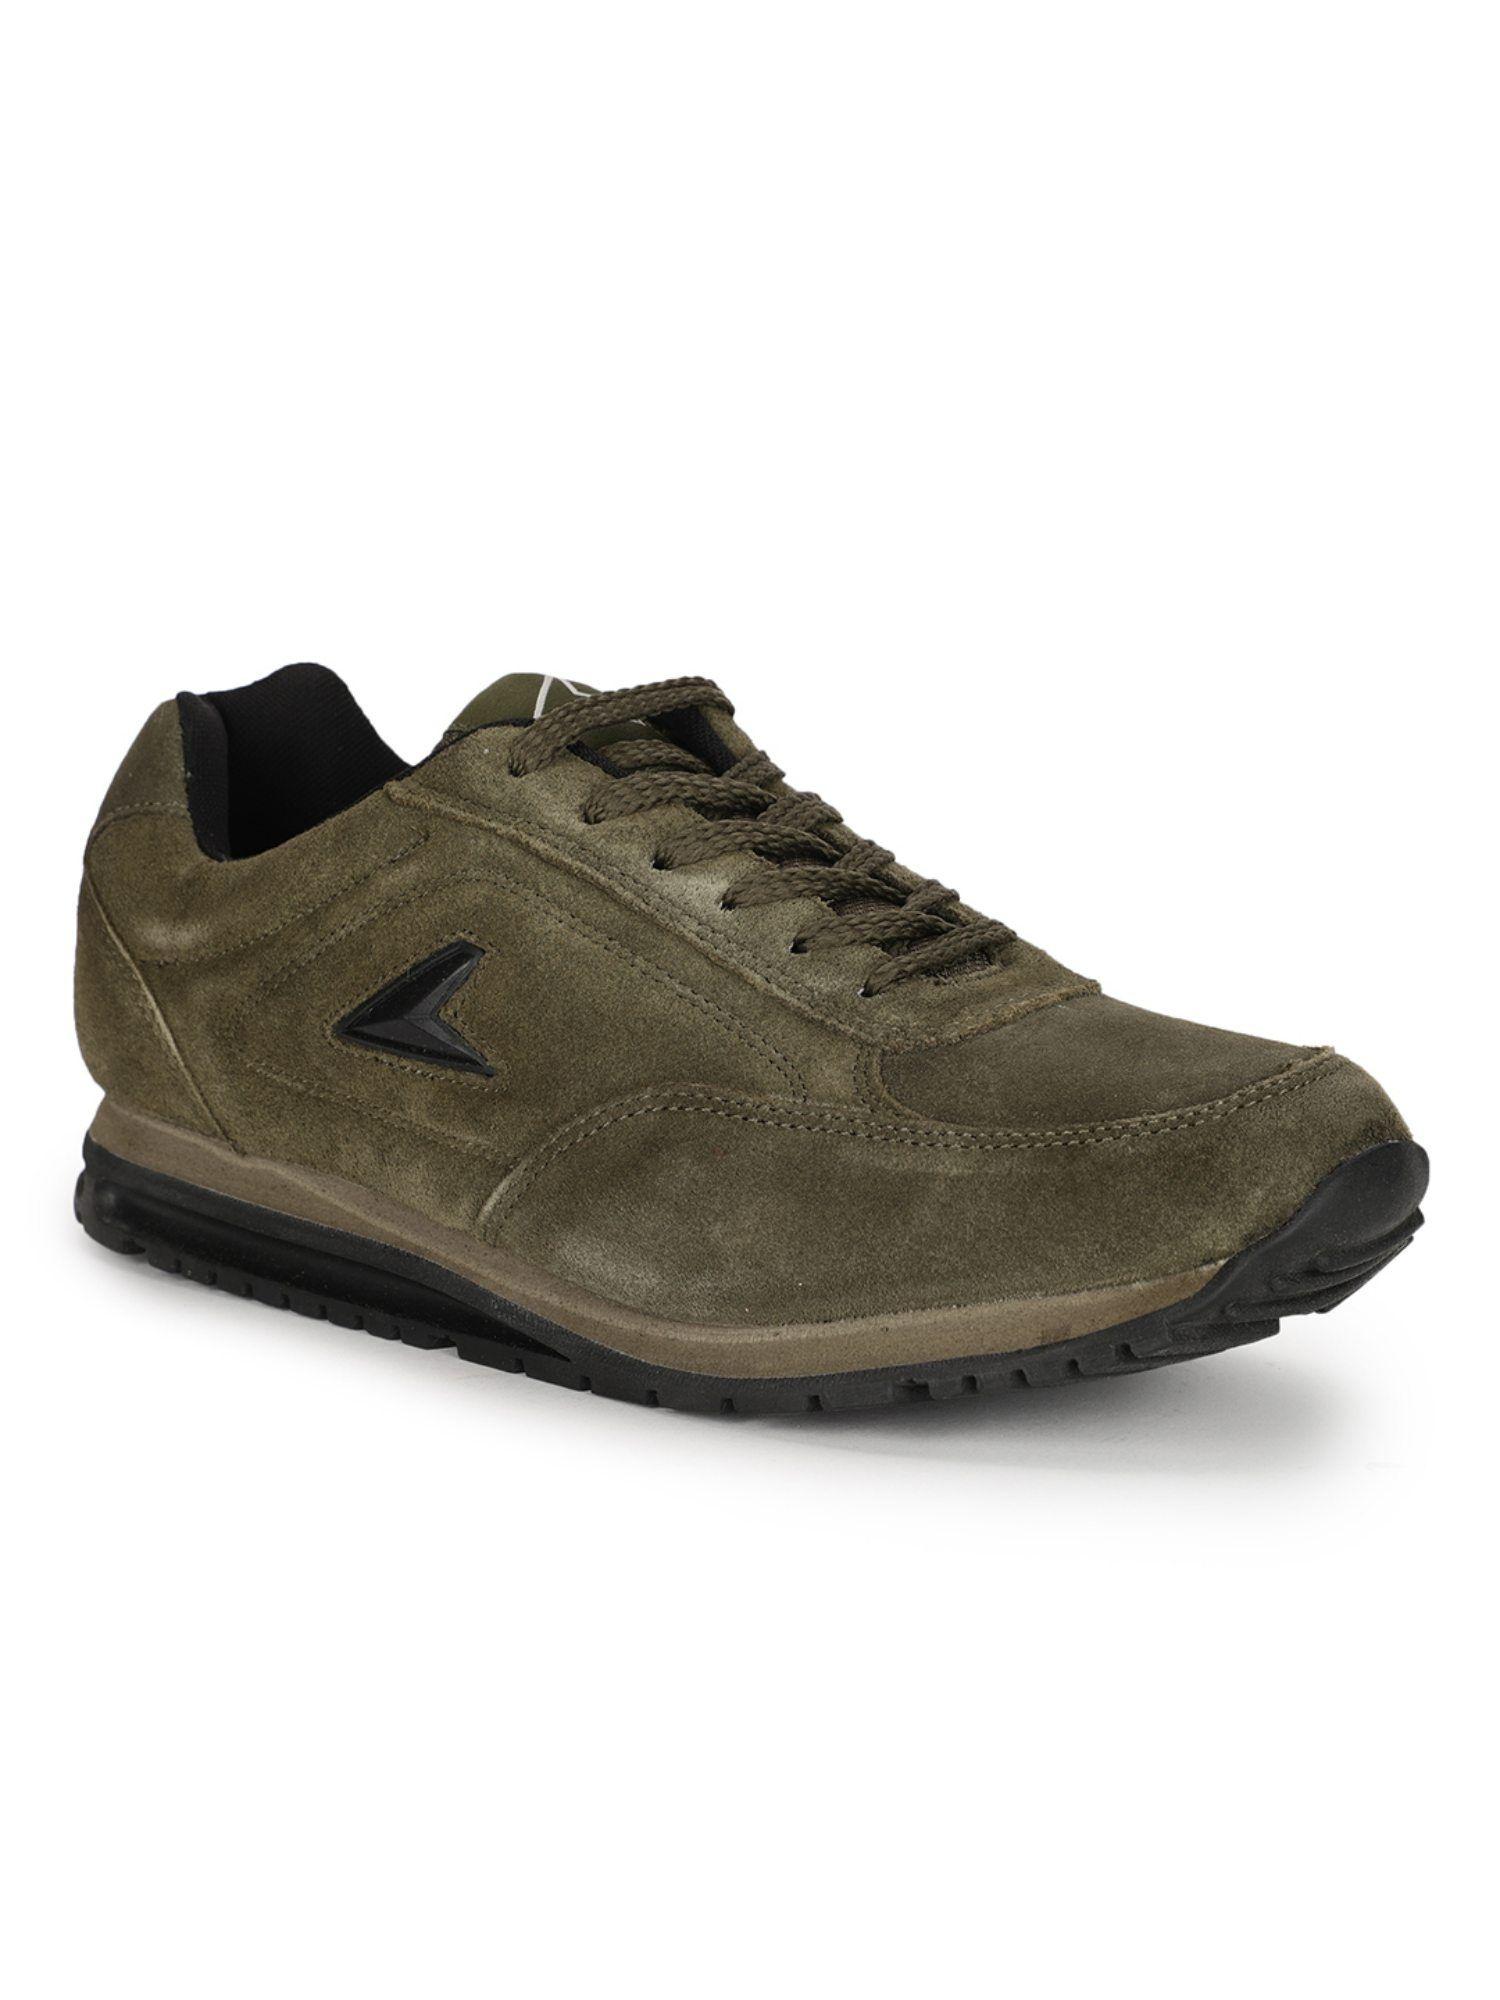 Solid Olive Running Shoes